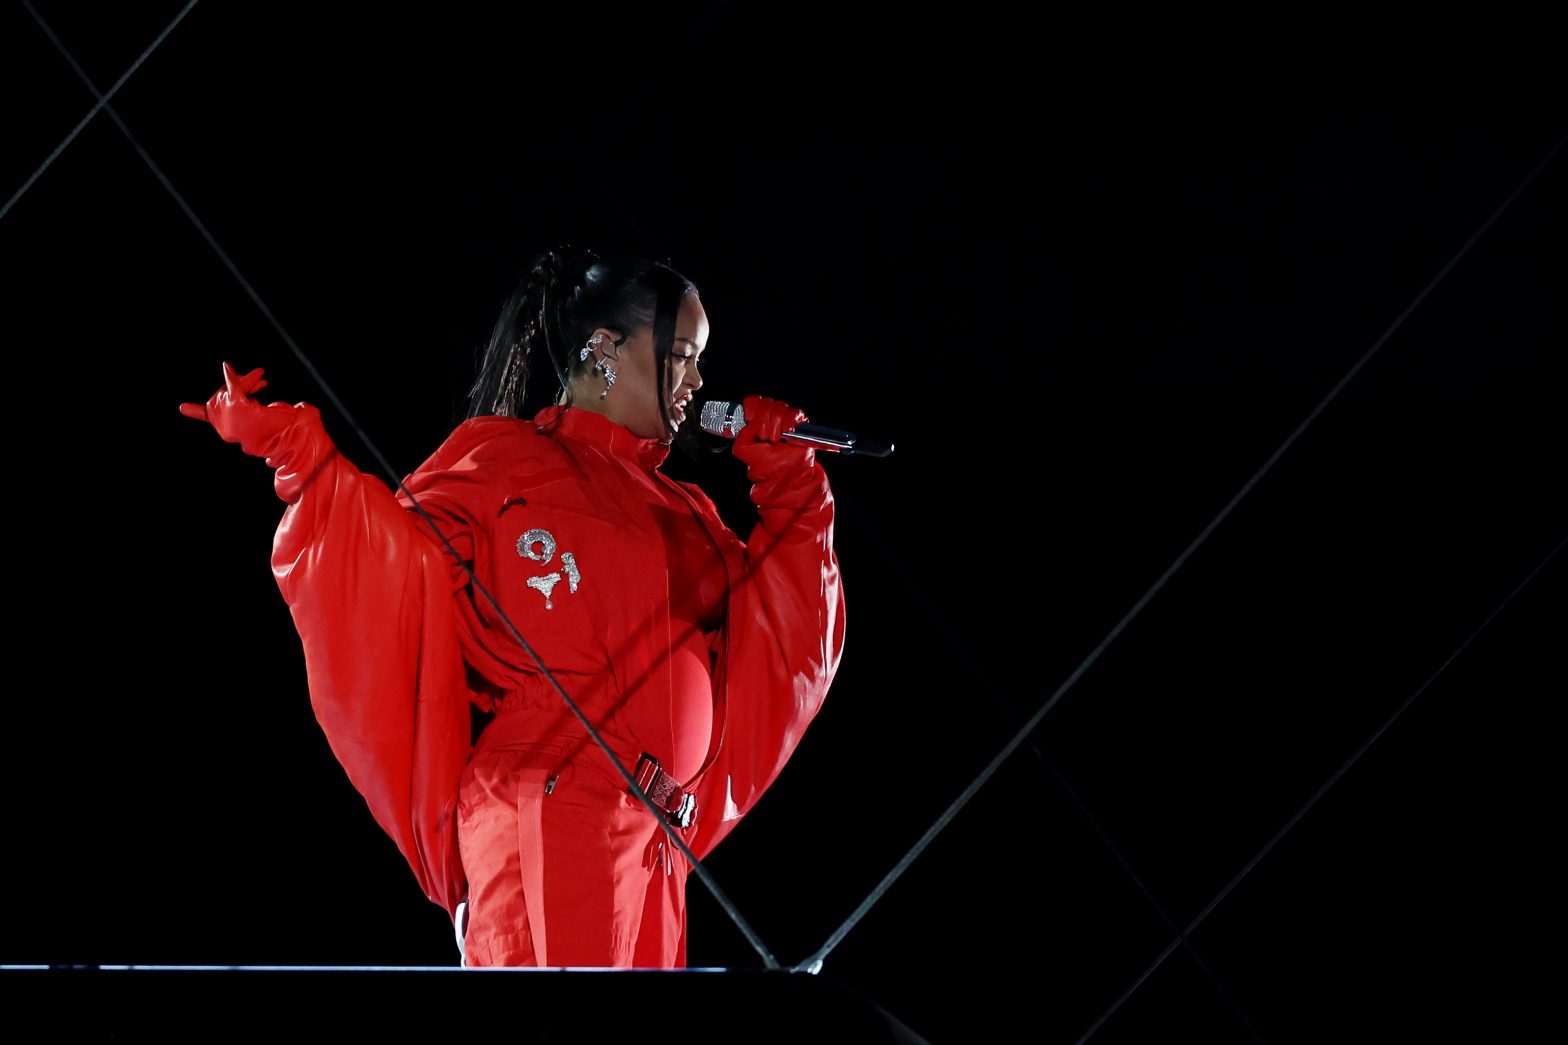 Rihanna trolled for allegedly lip syncing during Super Bowl 2023 halftime show performance